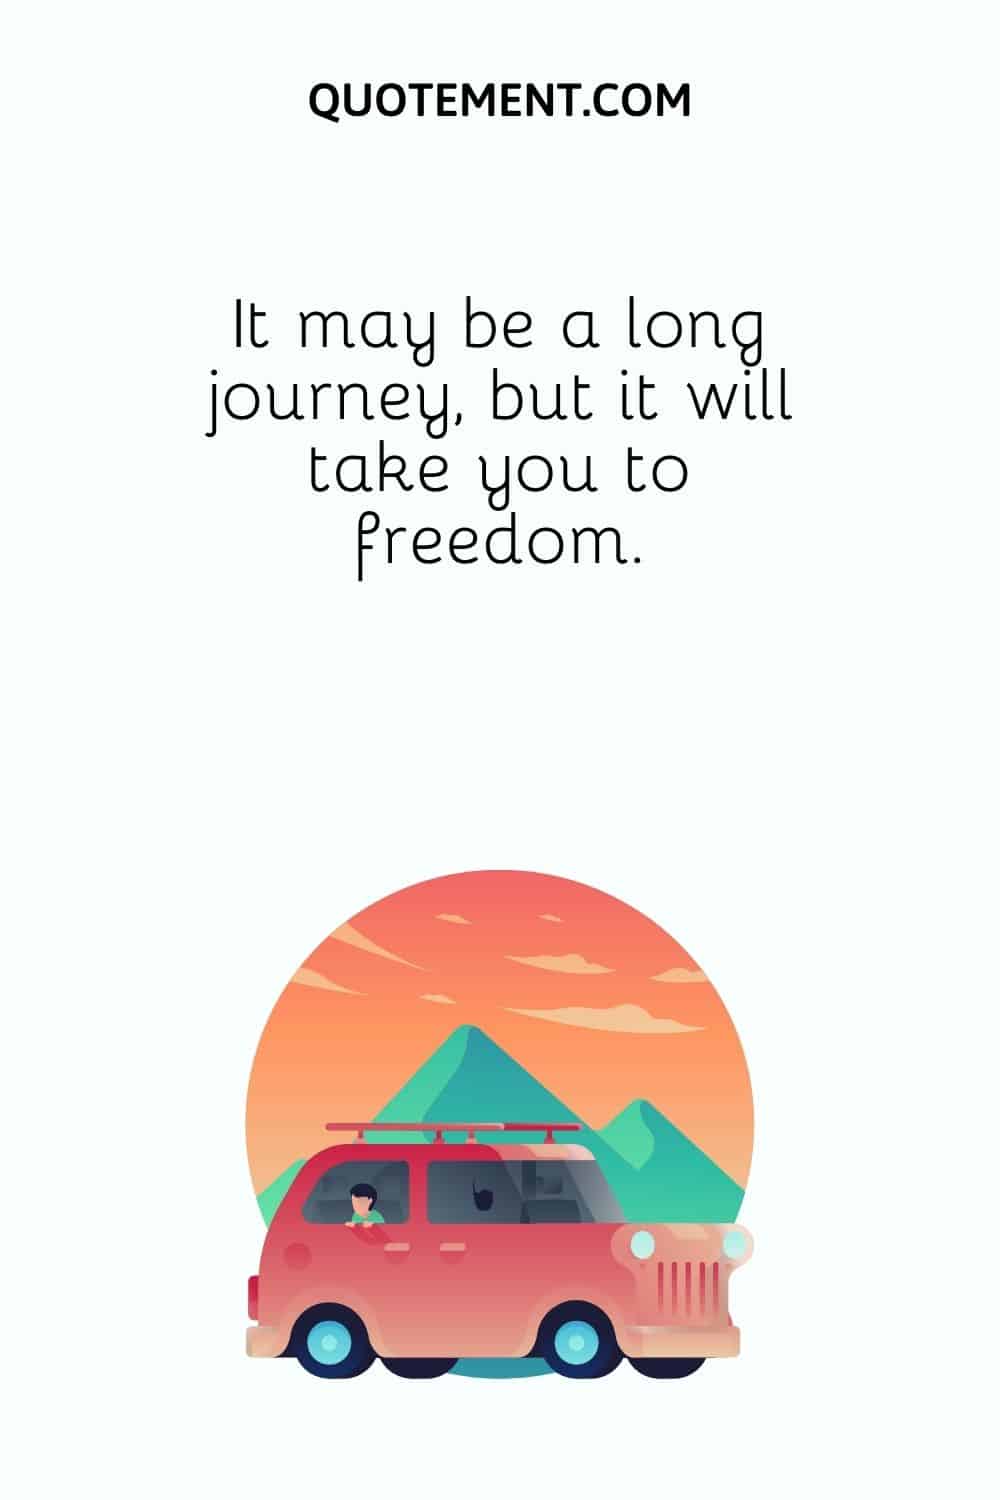 It may be a long journey, but it will take you to freedom